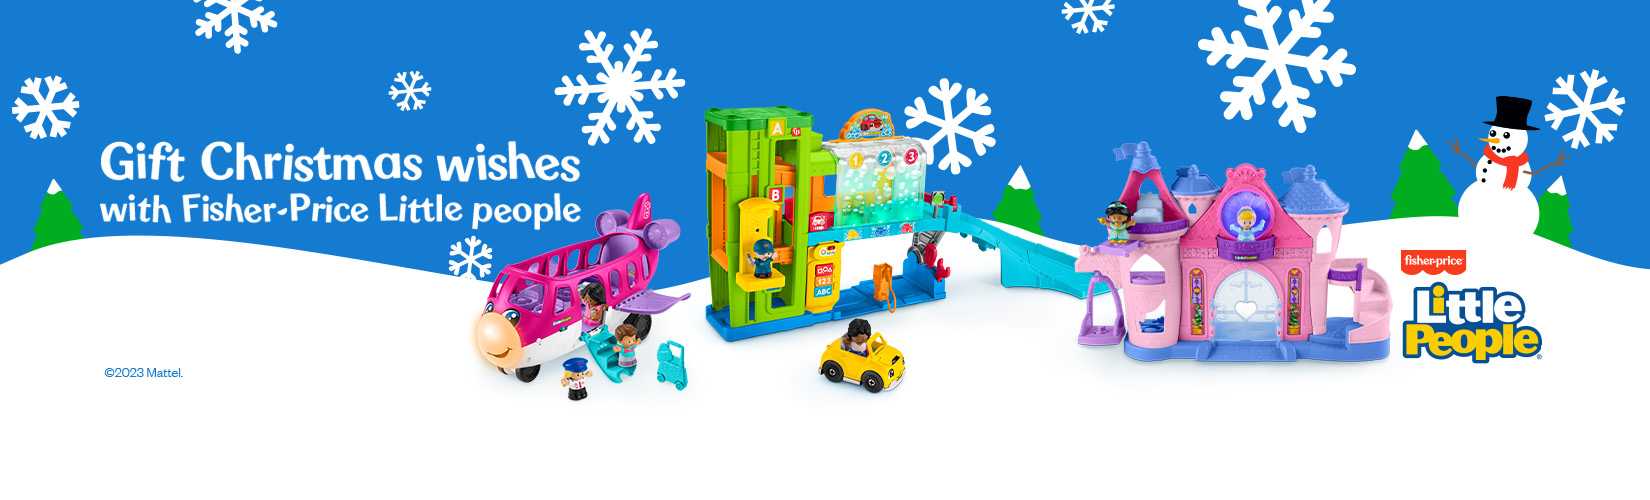 Gift Christmas wishes with Fisher-Price Little people.